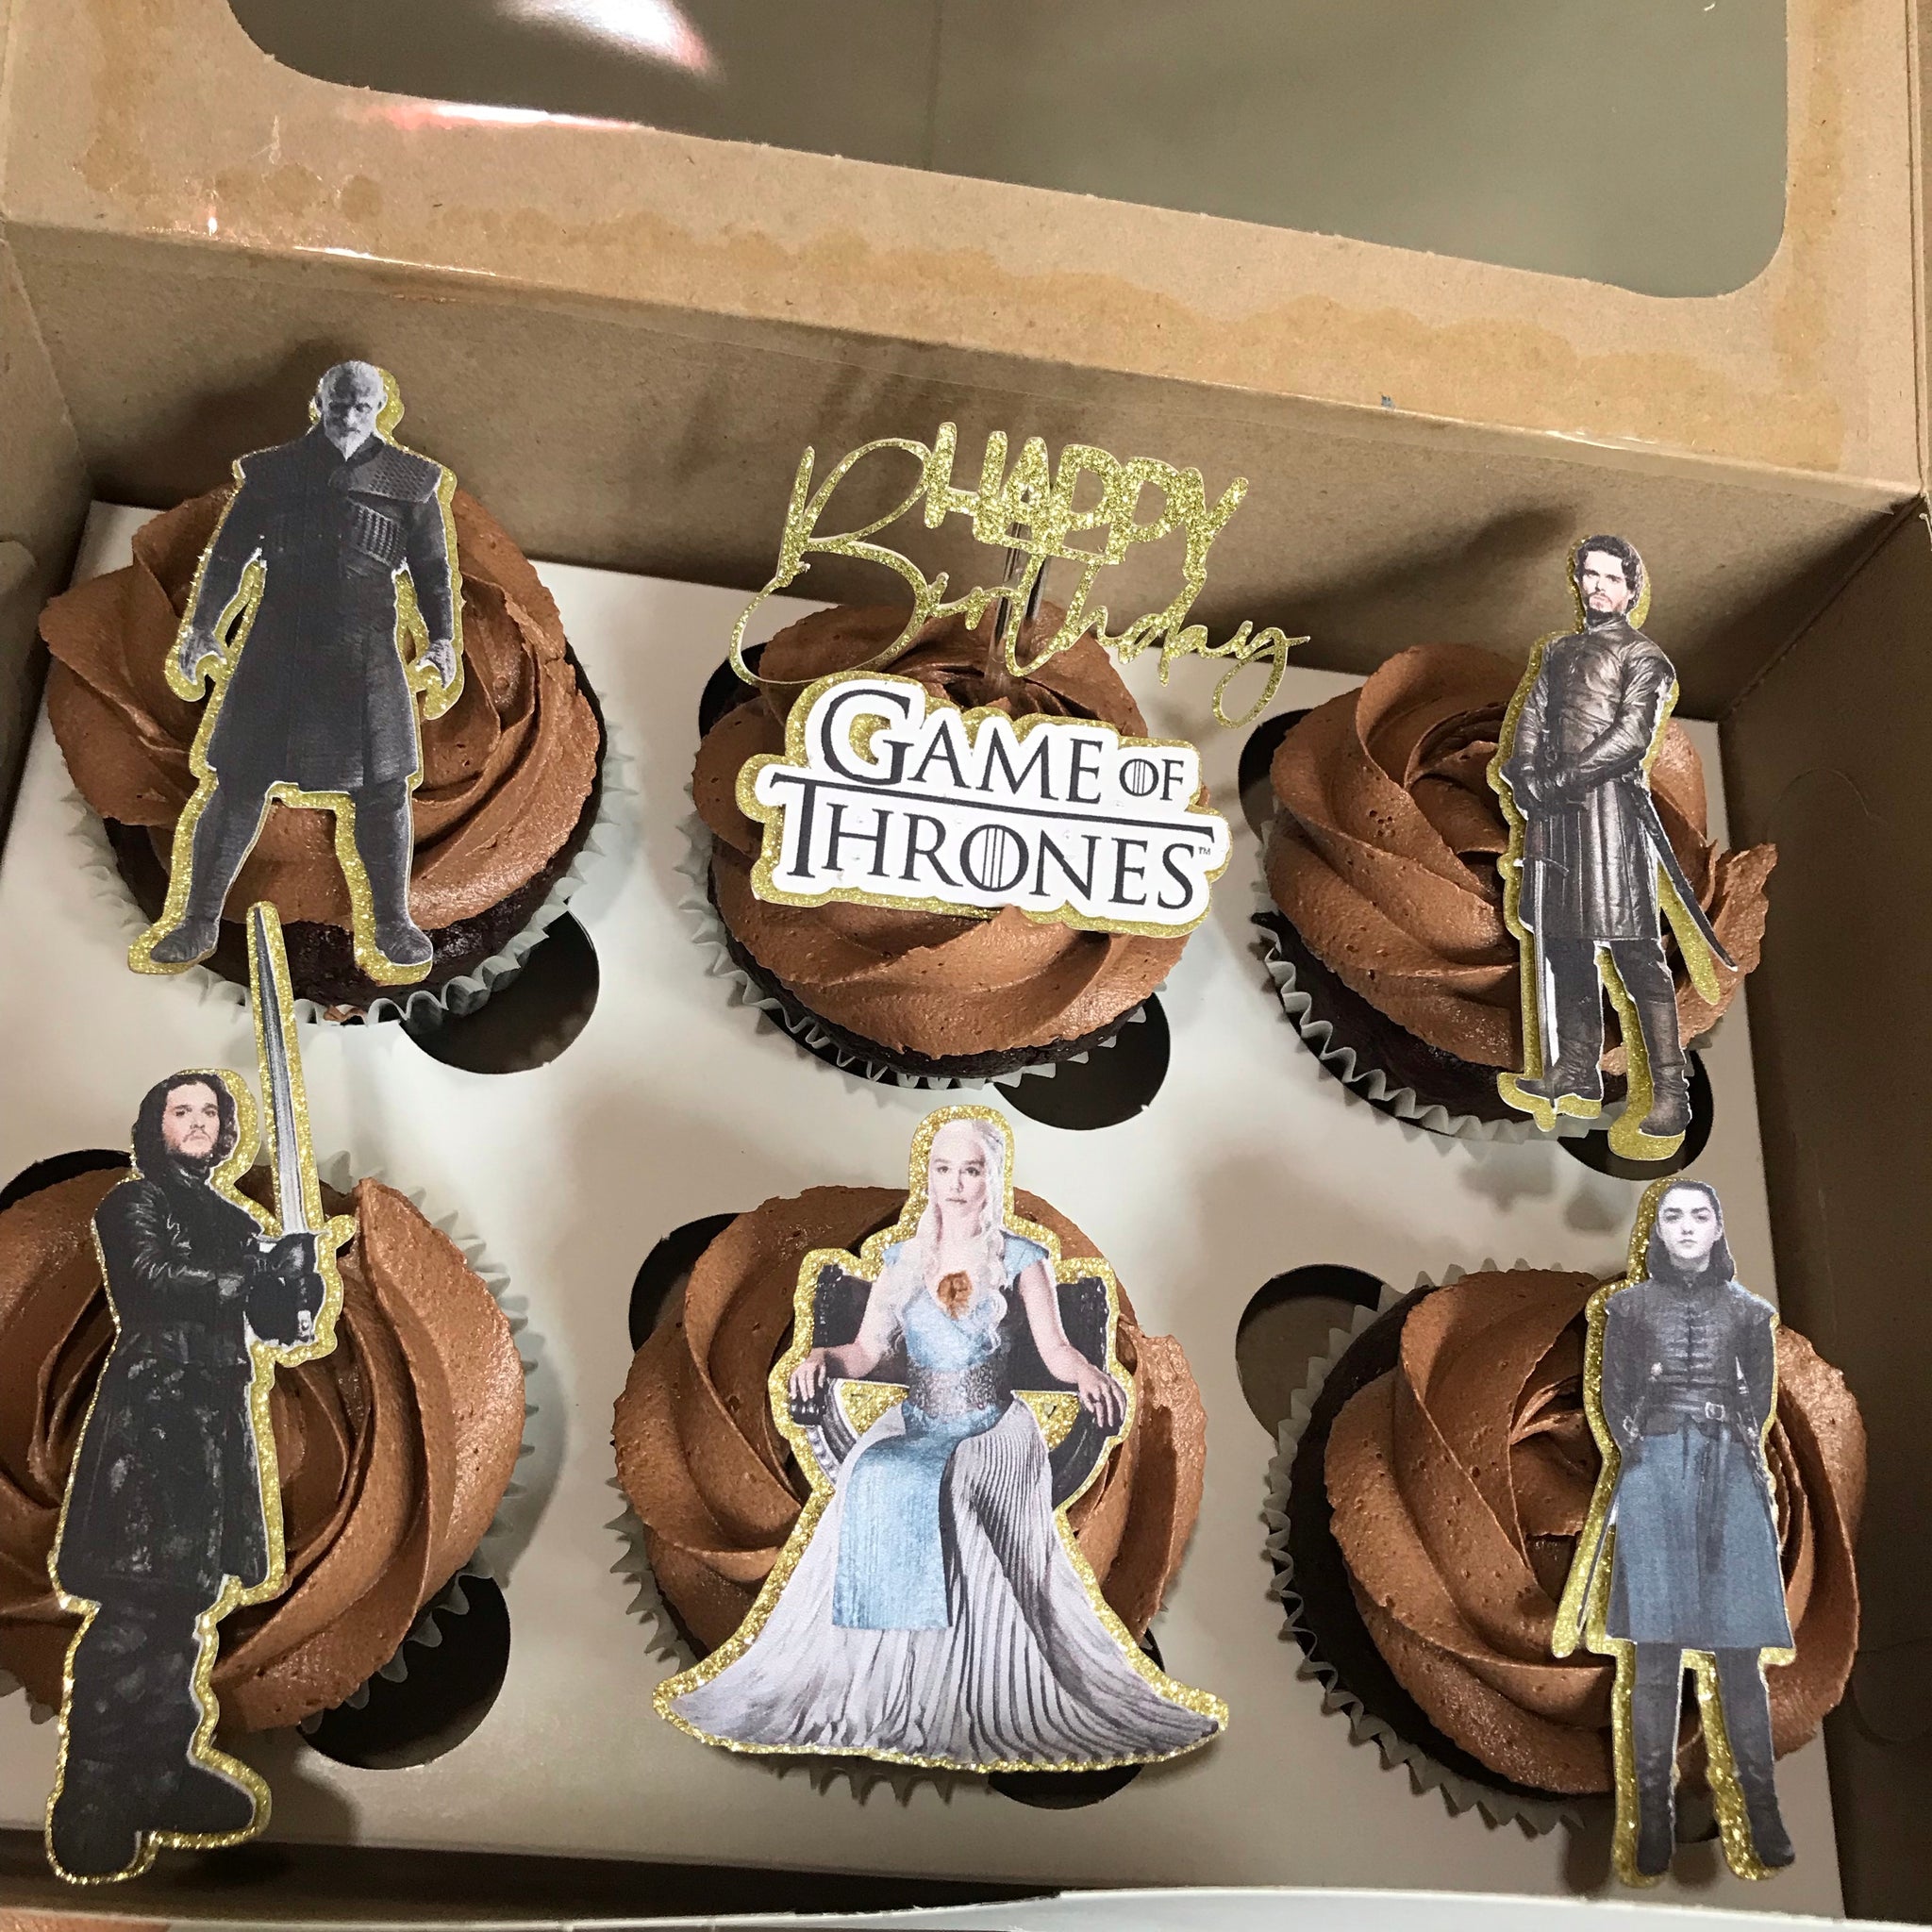 Game of thrones cupcakes